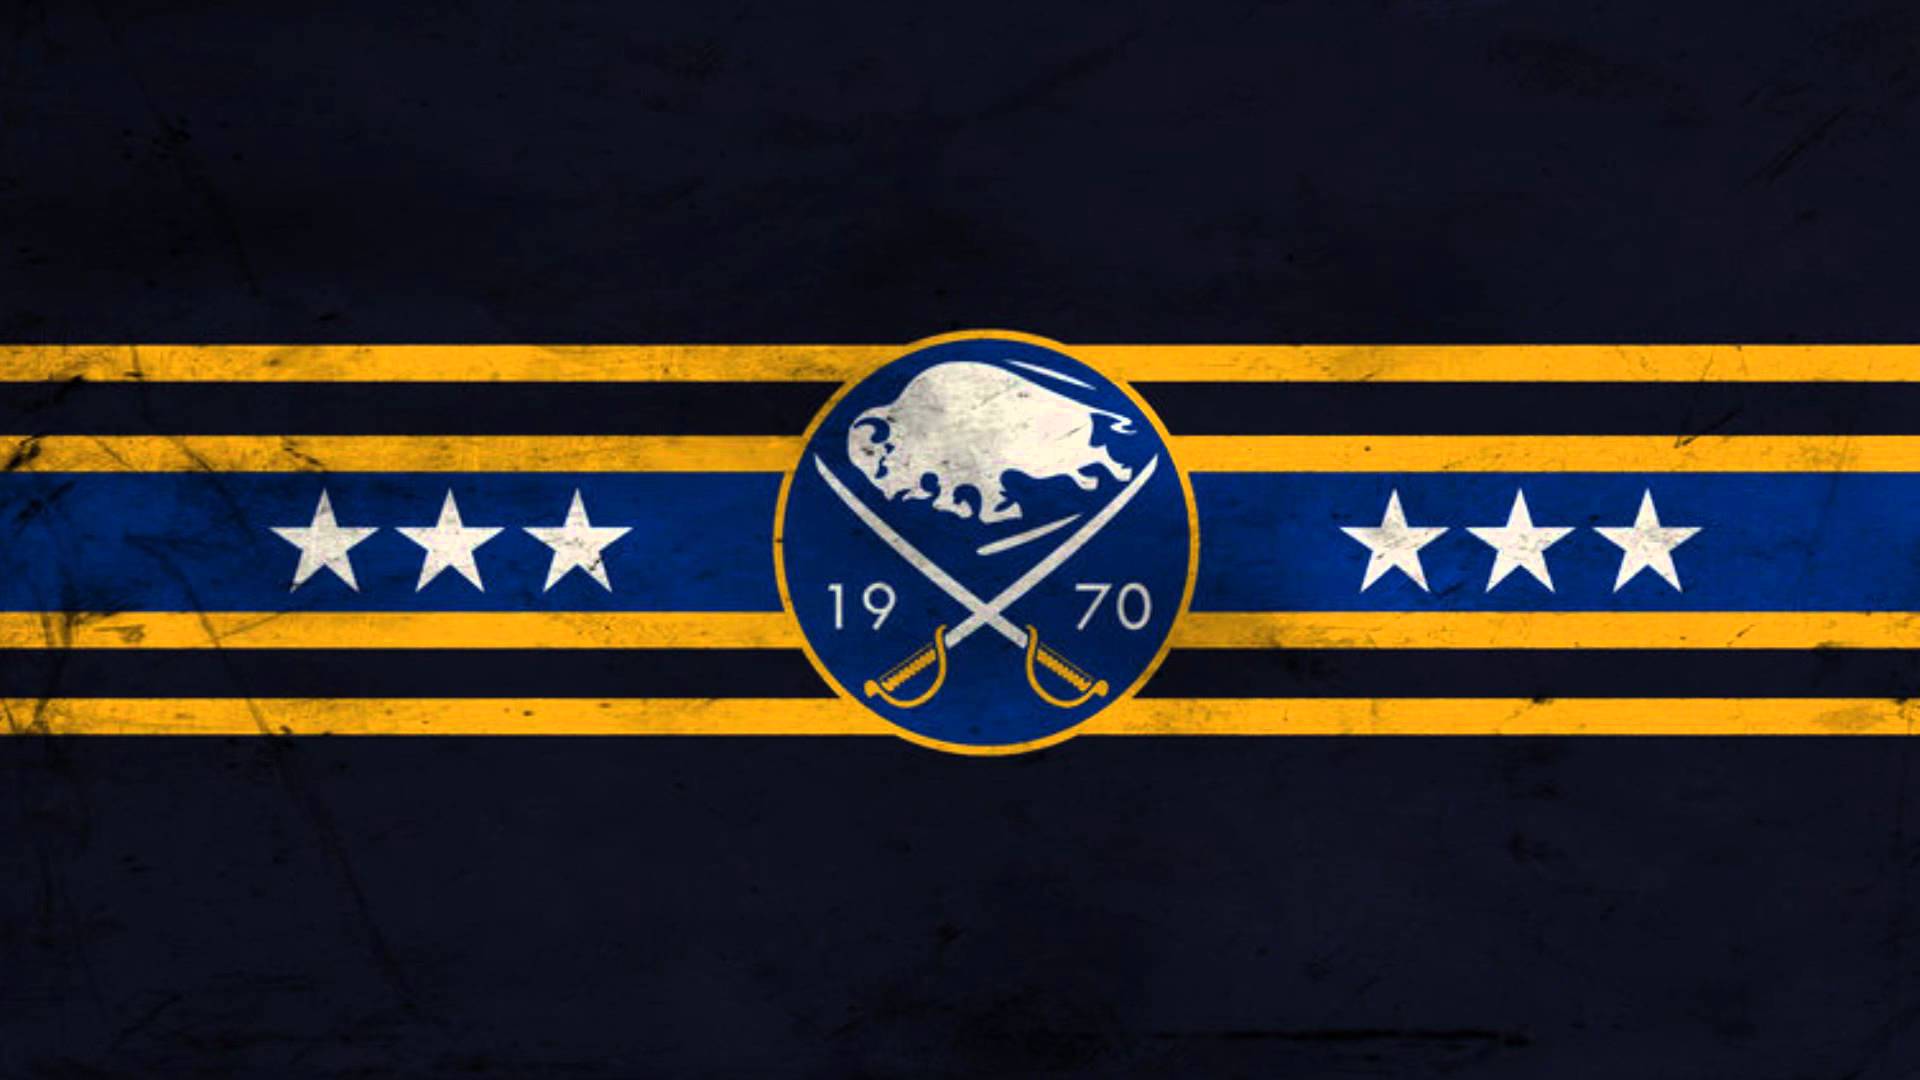 HD Quality Wallpaper | Collection: Sports, 1920x1080 Buffalo Sabres